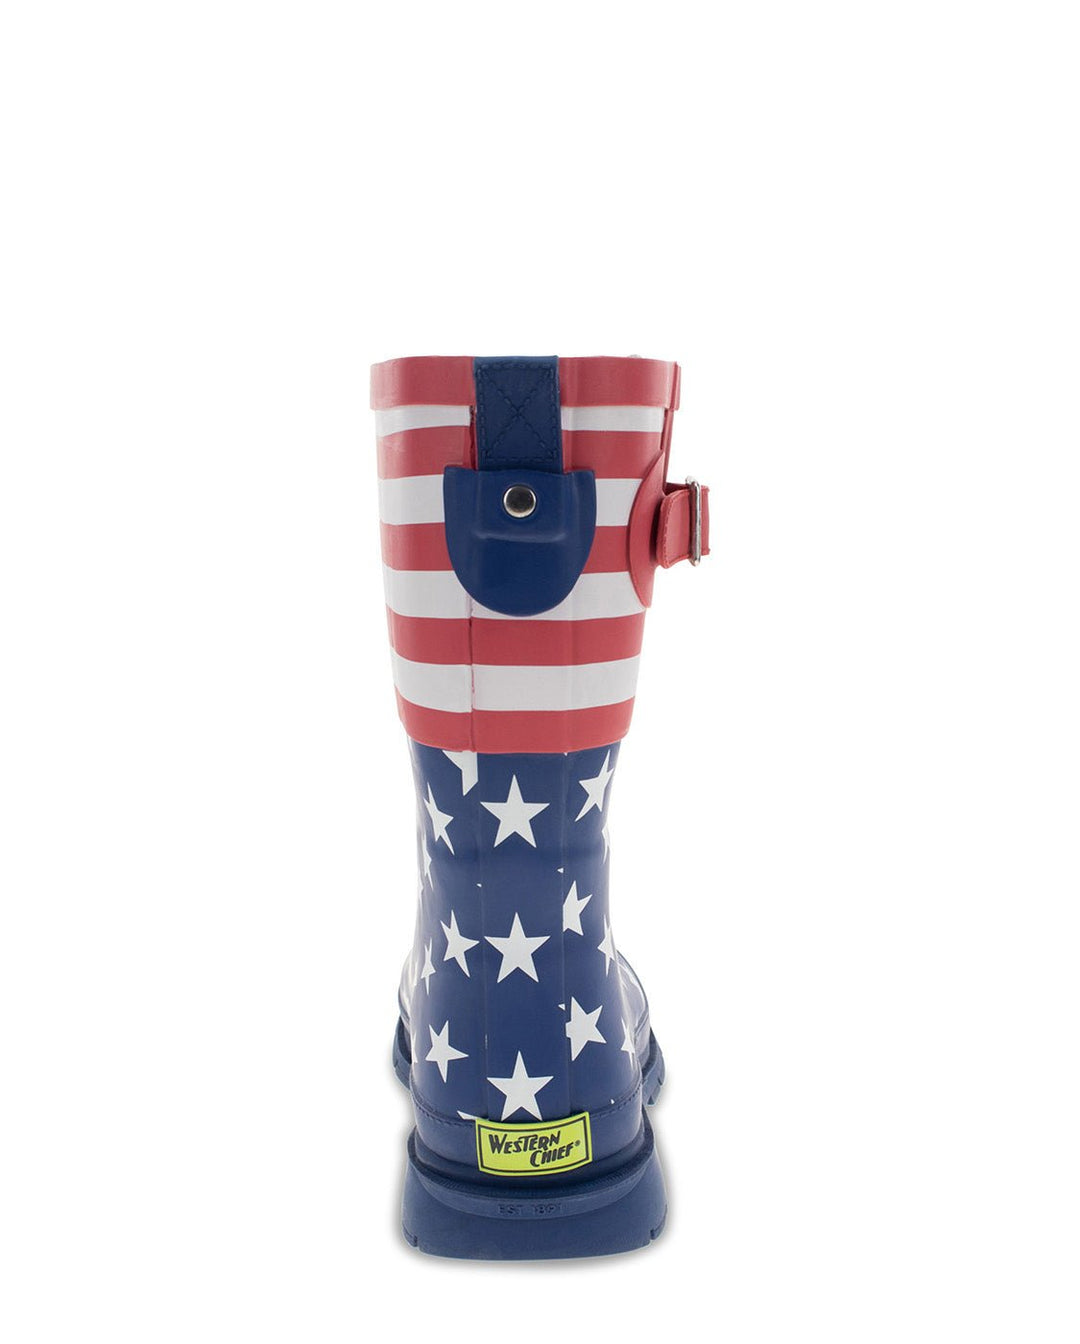 New! Women's Old Glory Mid Rain Boot - Blue - Western Chief